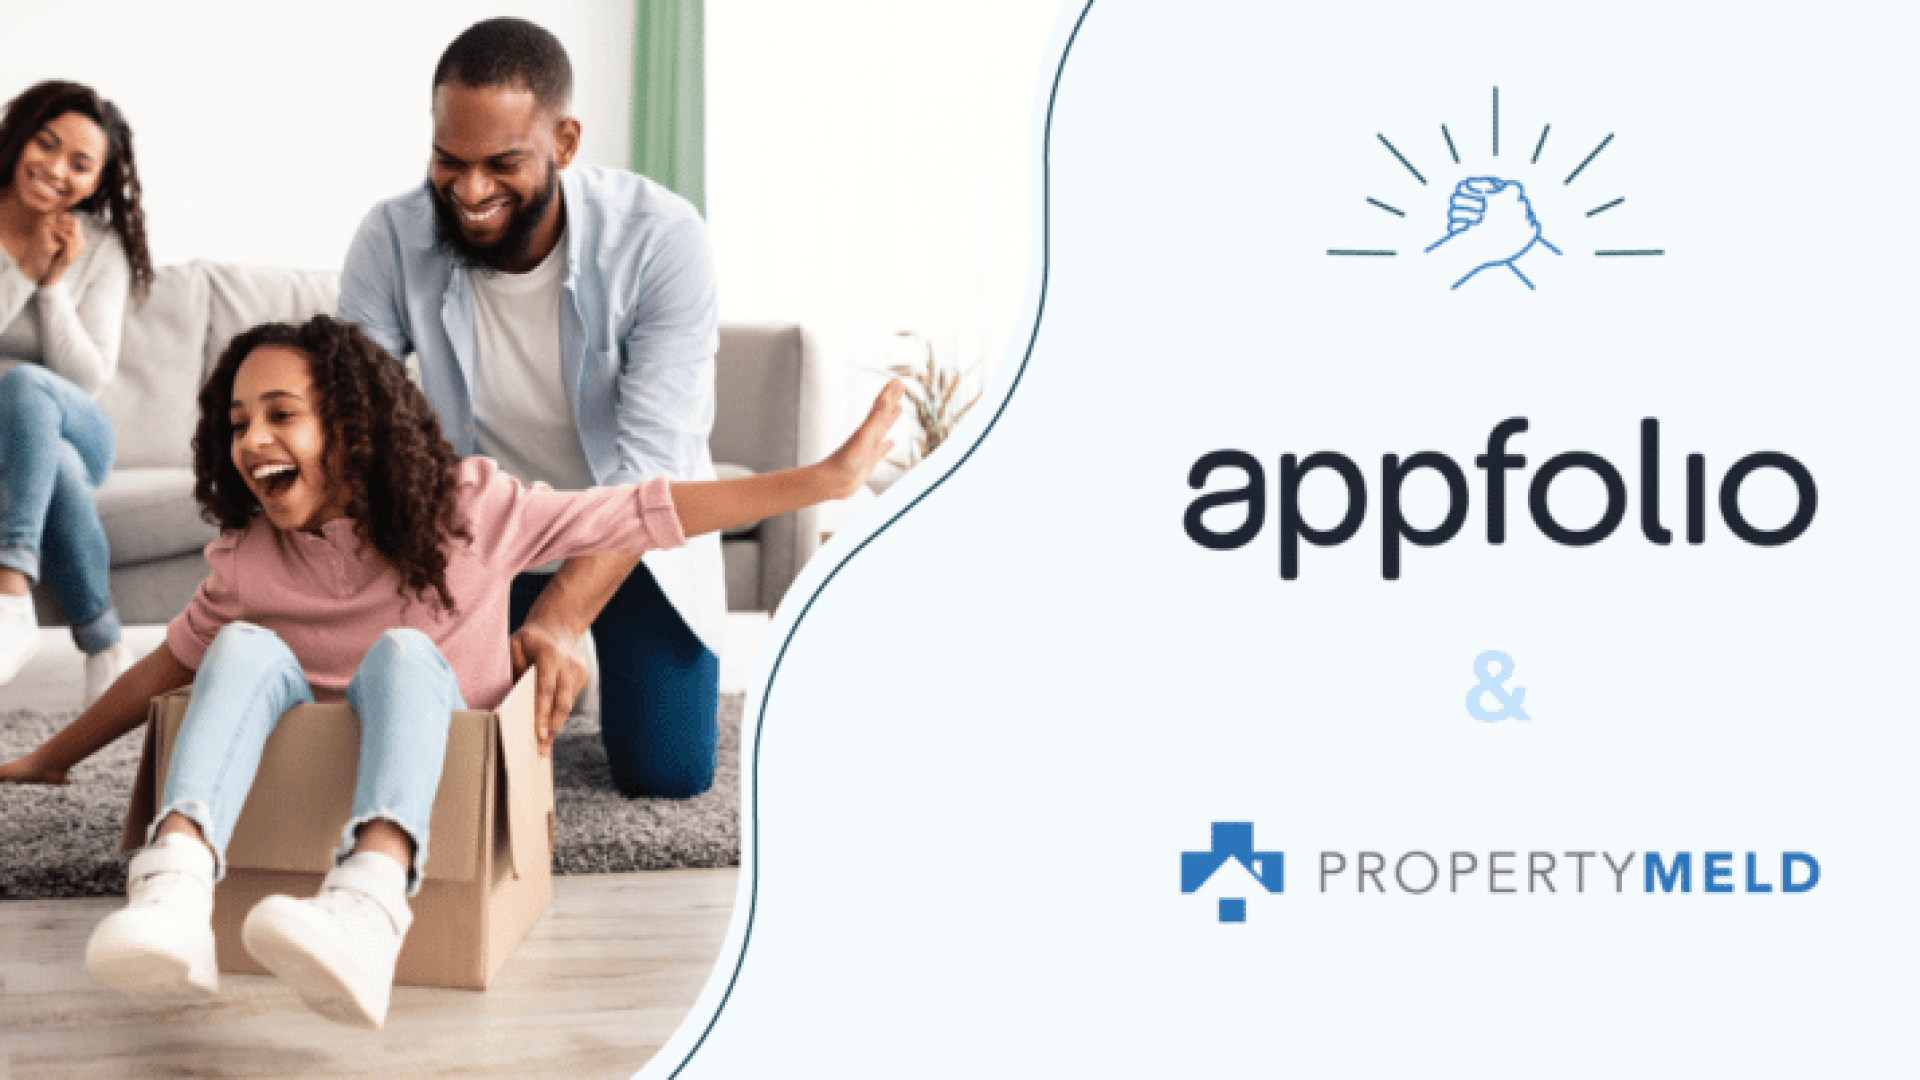 AppFolio and Property Meld logos